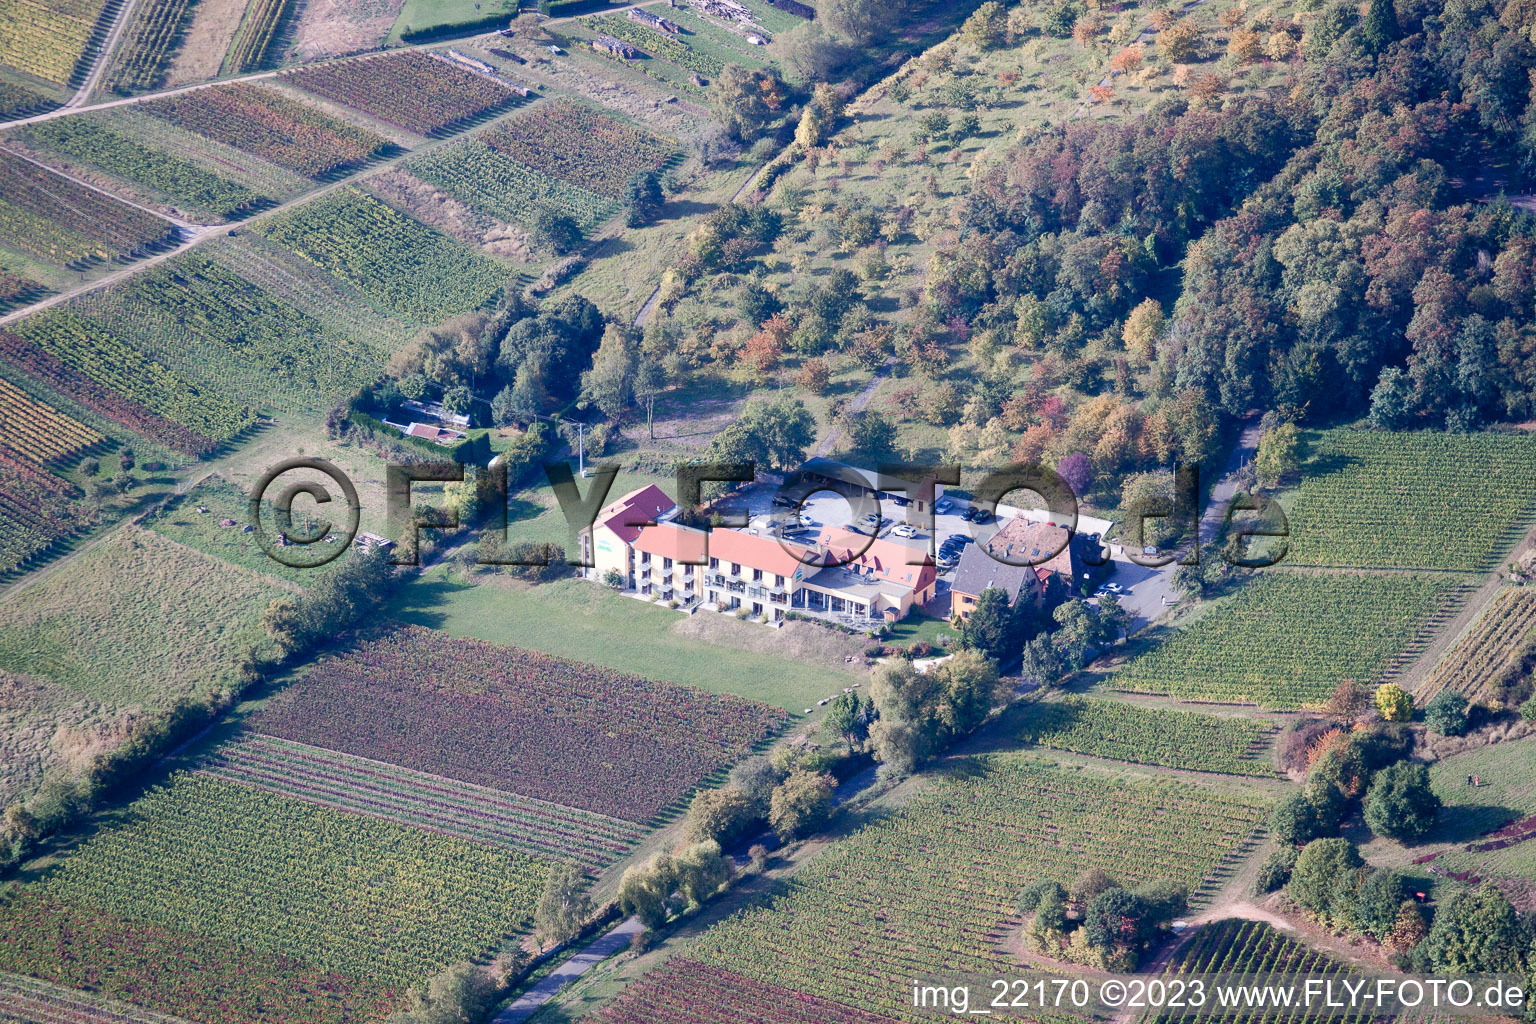 Rhodt unter Rietburg in the state Rhineland-Palatinate, Germany viewn from the air